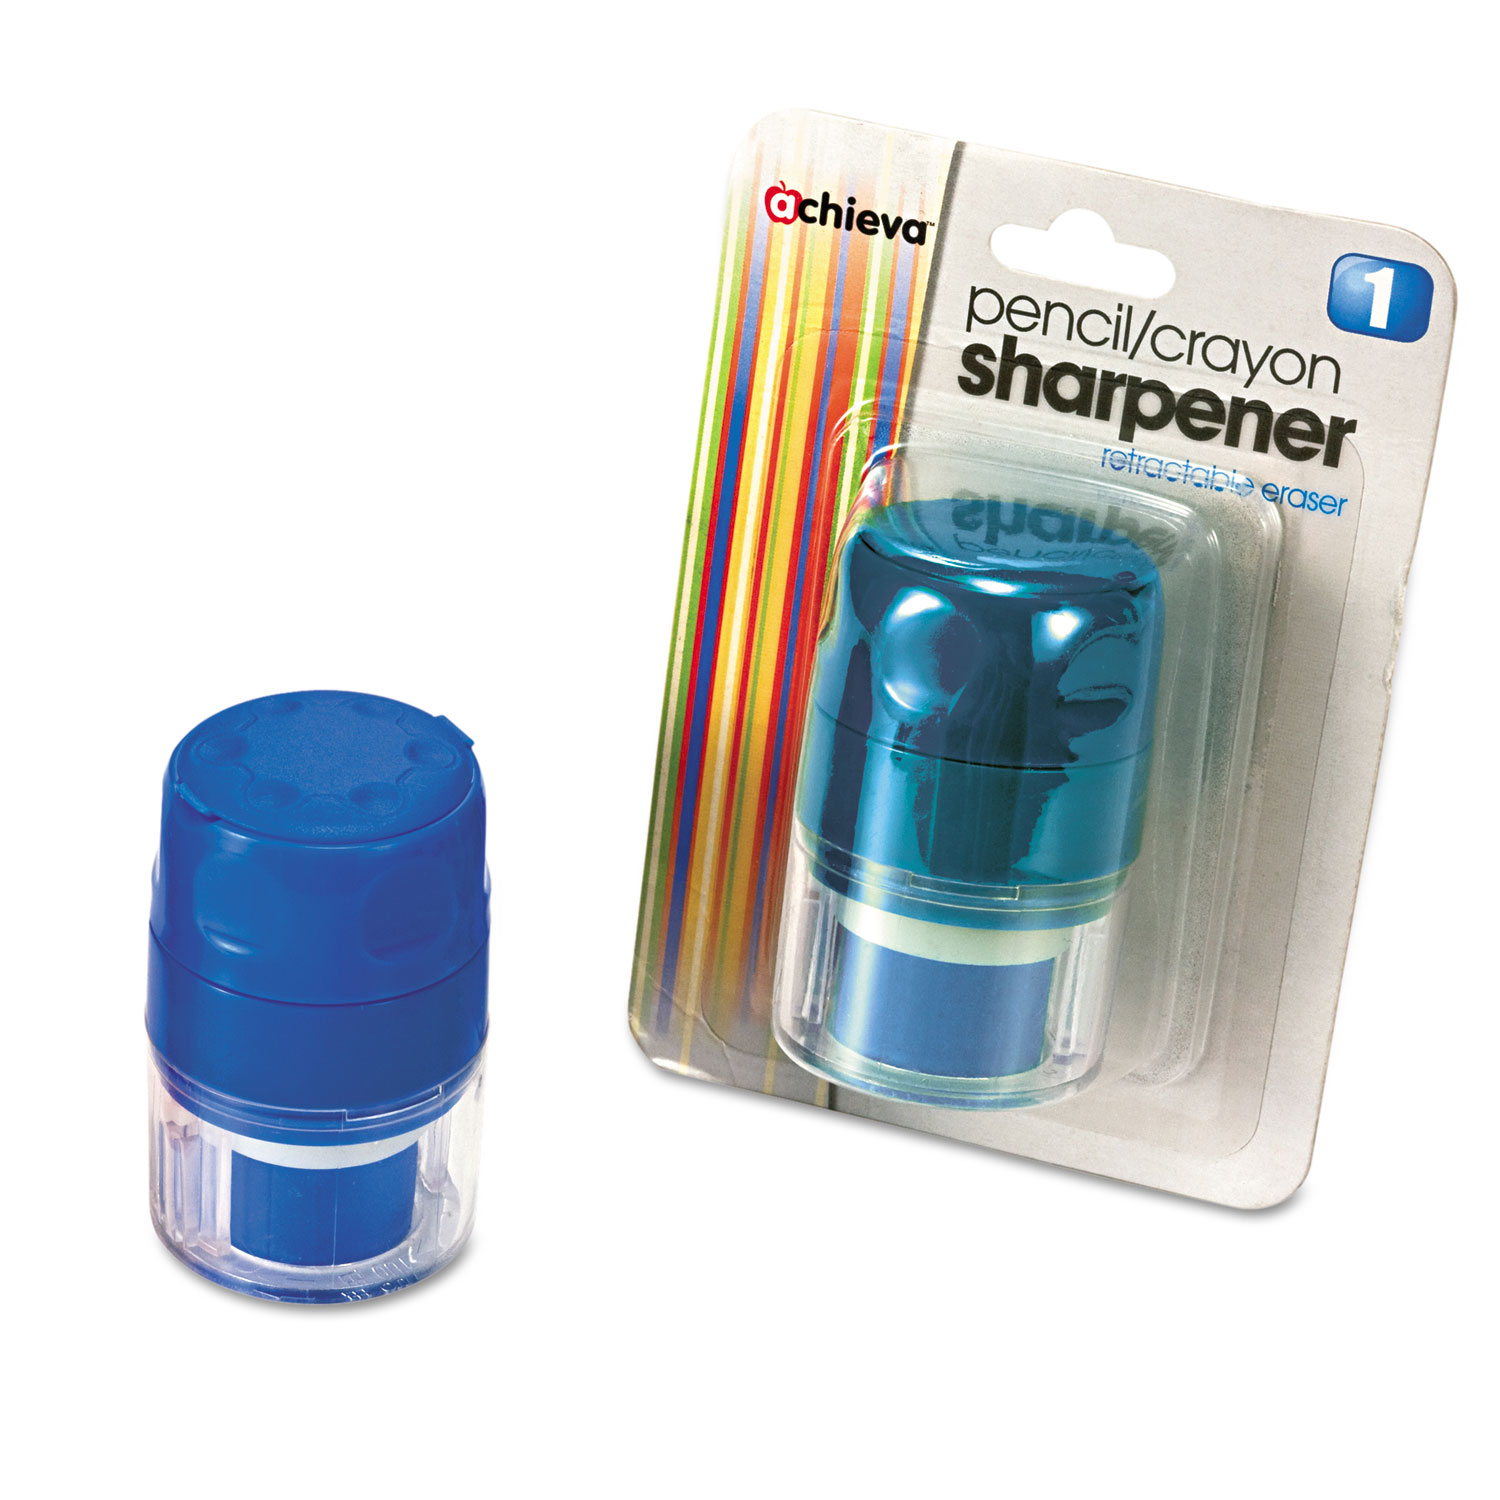  Officemate 30220 Twin Pencil/Crayon Sharpener with Cap, 1.5 dia. x 2.38, Blue (OIC30220) 